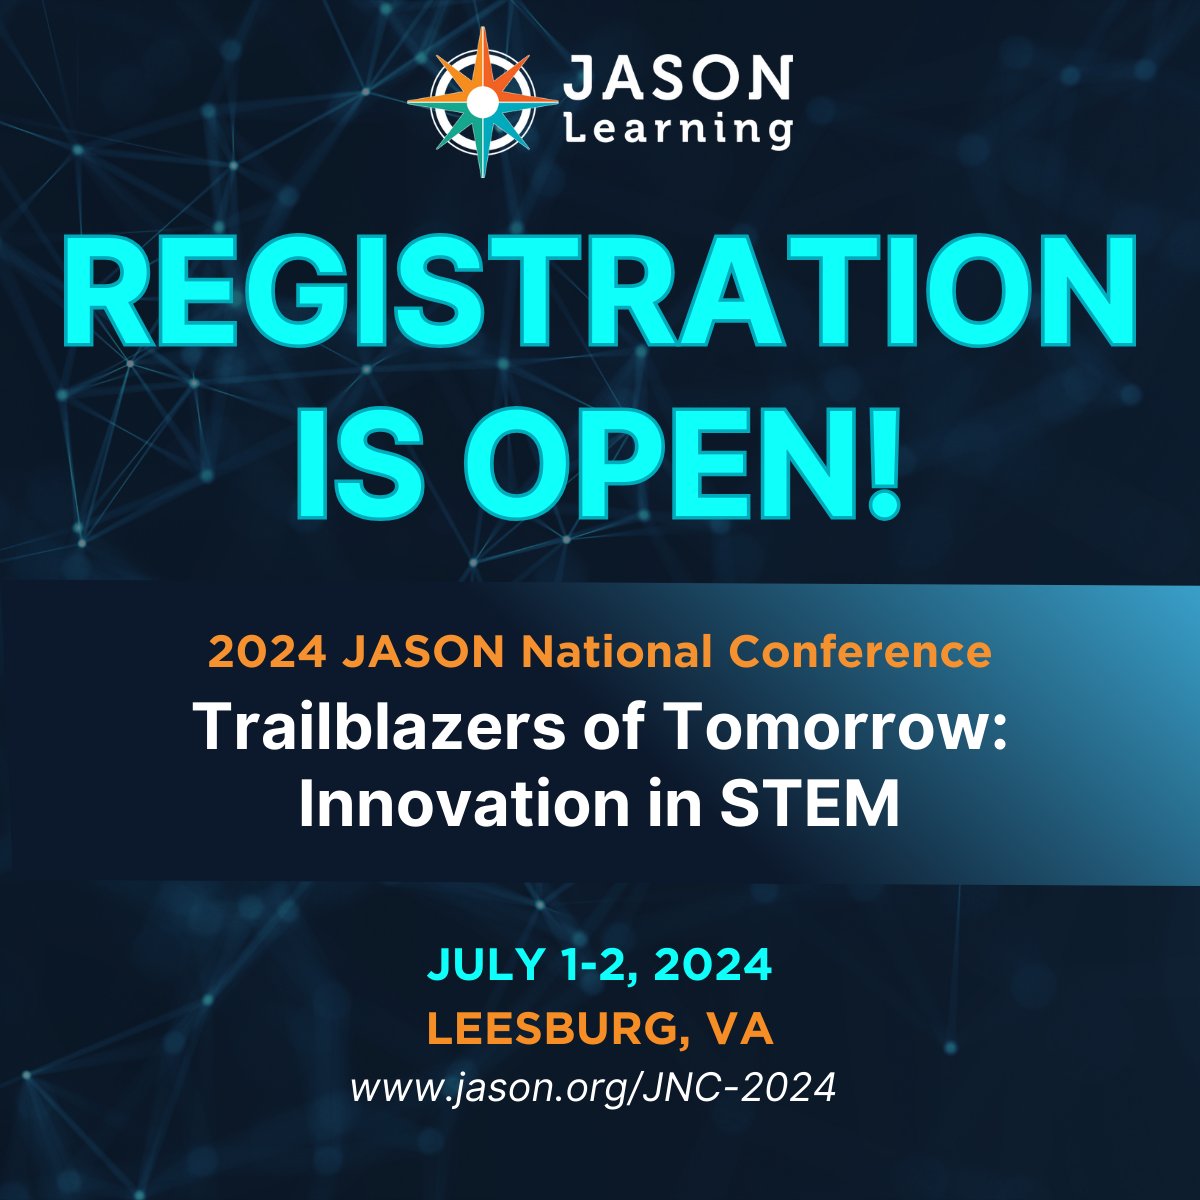 Registration is OPEN for JNC 2024!🌟 Don't miss out on this incredible opportunity to join us for two days filled with networking, learning, and fun! Secure your spot now before it's too late. Register here: bit.ly/4bOCKxb. #JNC2024 #STEMeducation